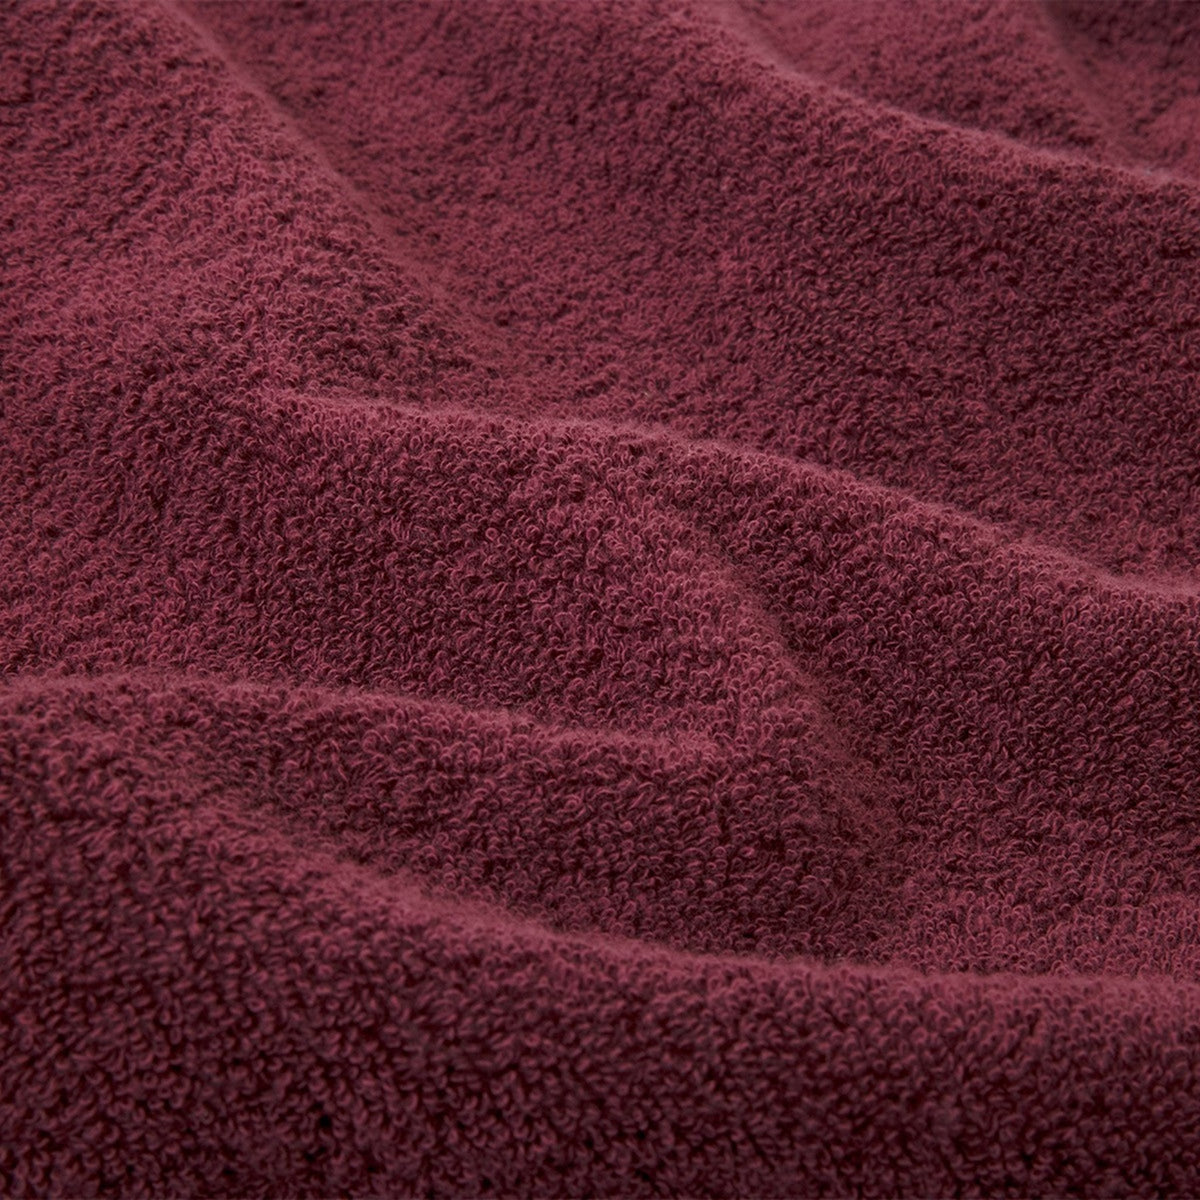 Detail Image of Yves Delorme Nature Bath Towels and Mats in Prune Color